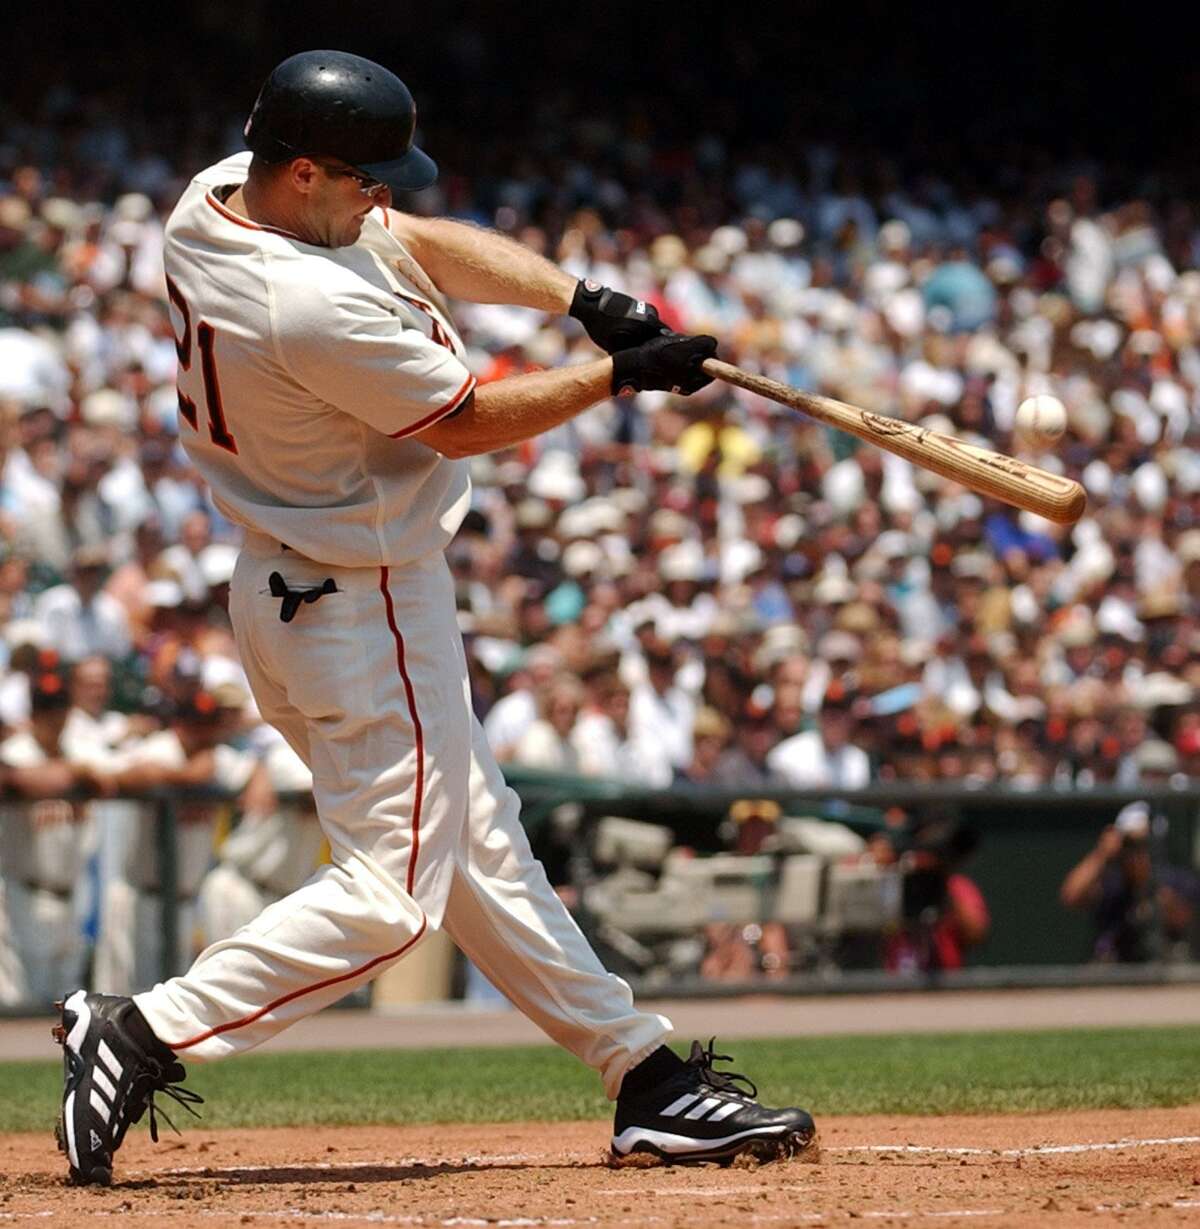 Too little too late for San Francisco Giants star Jeff Kent